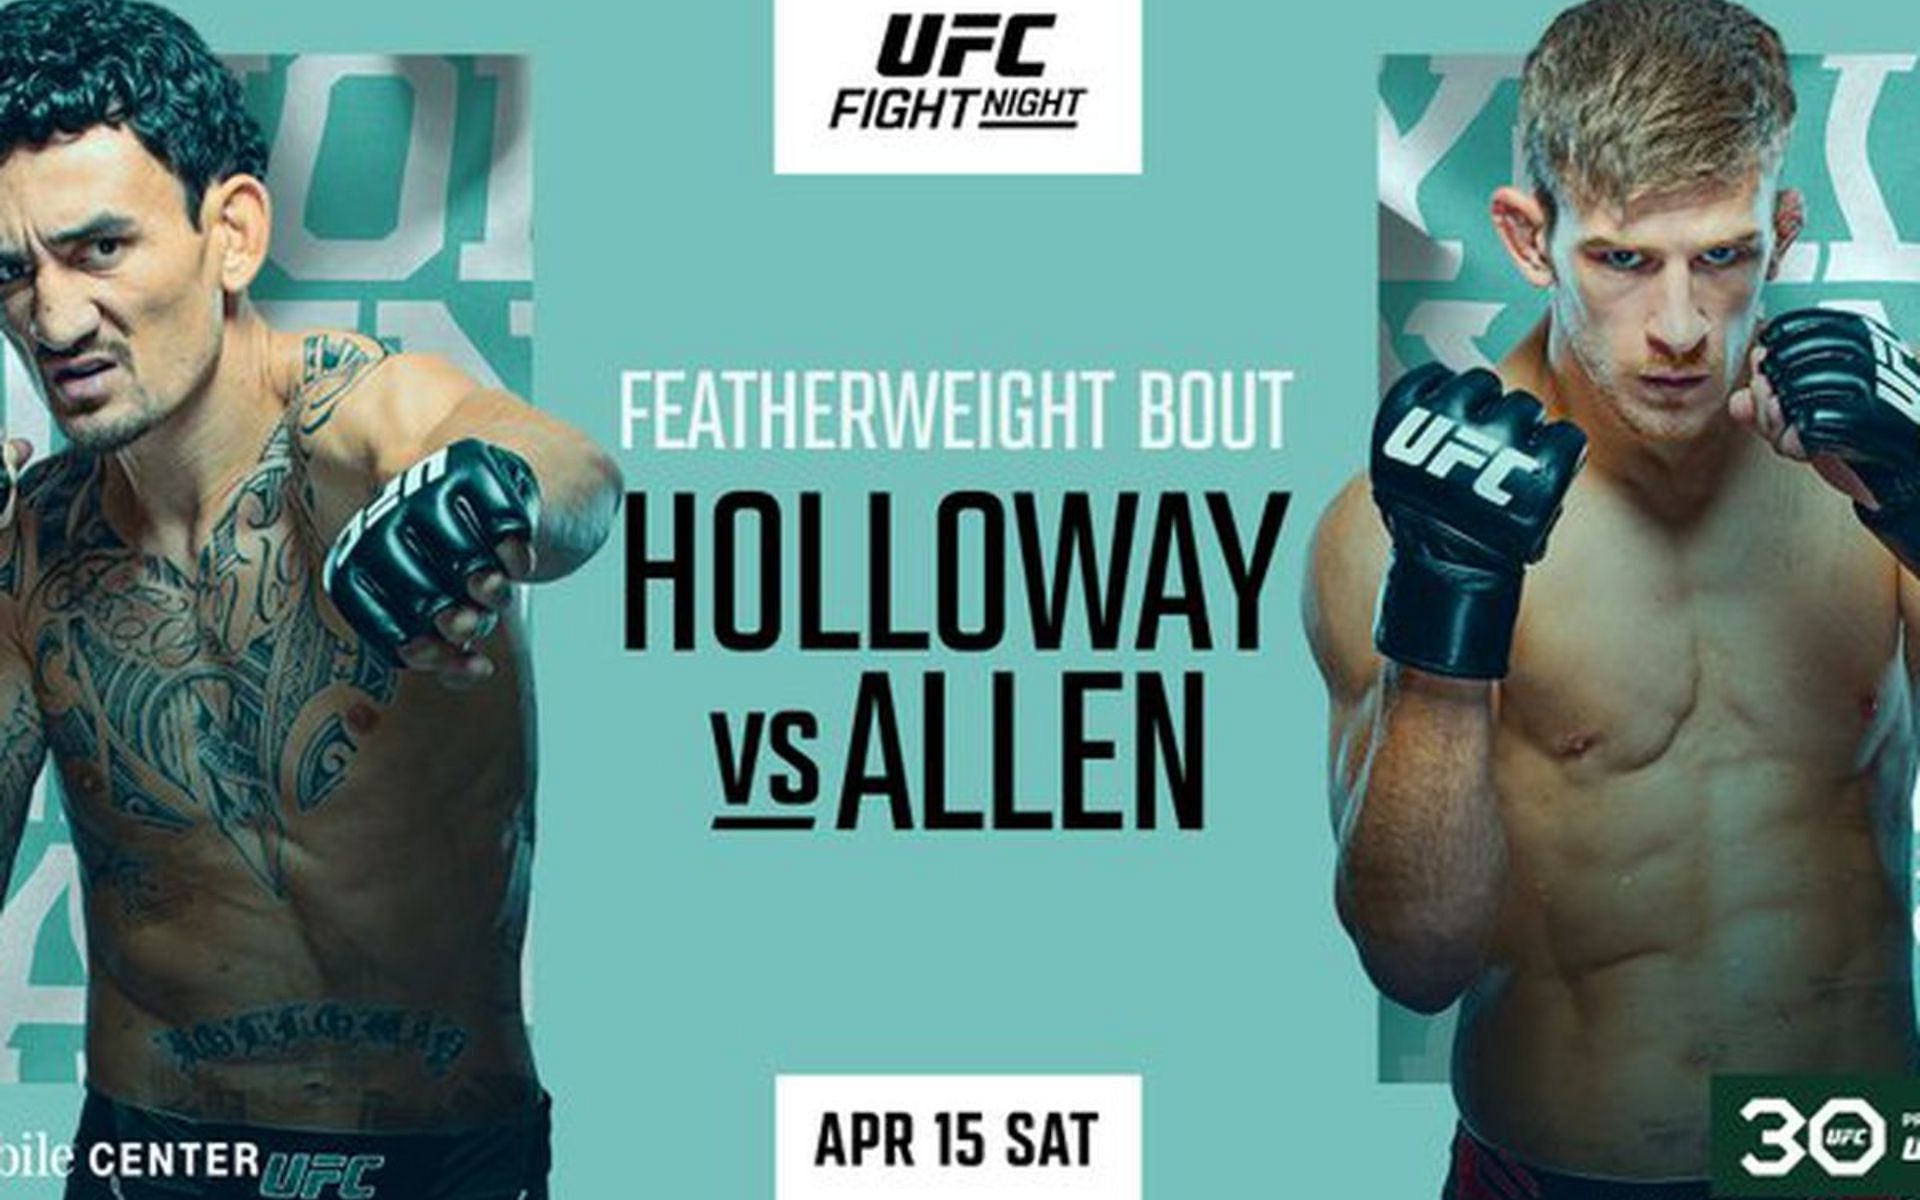 Max Holloway faces Arnold Allen in this weekend